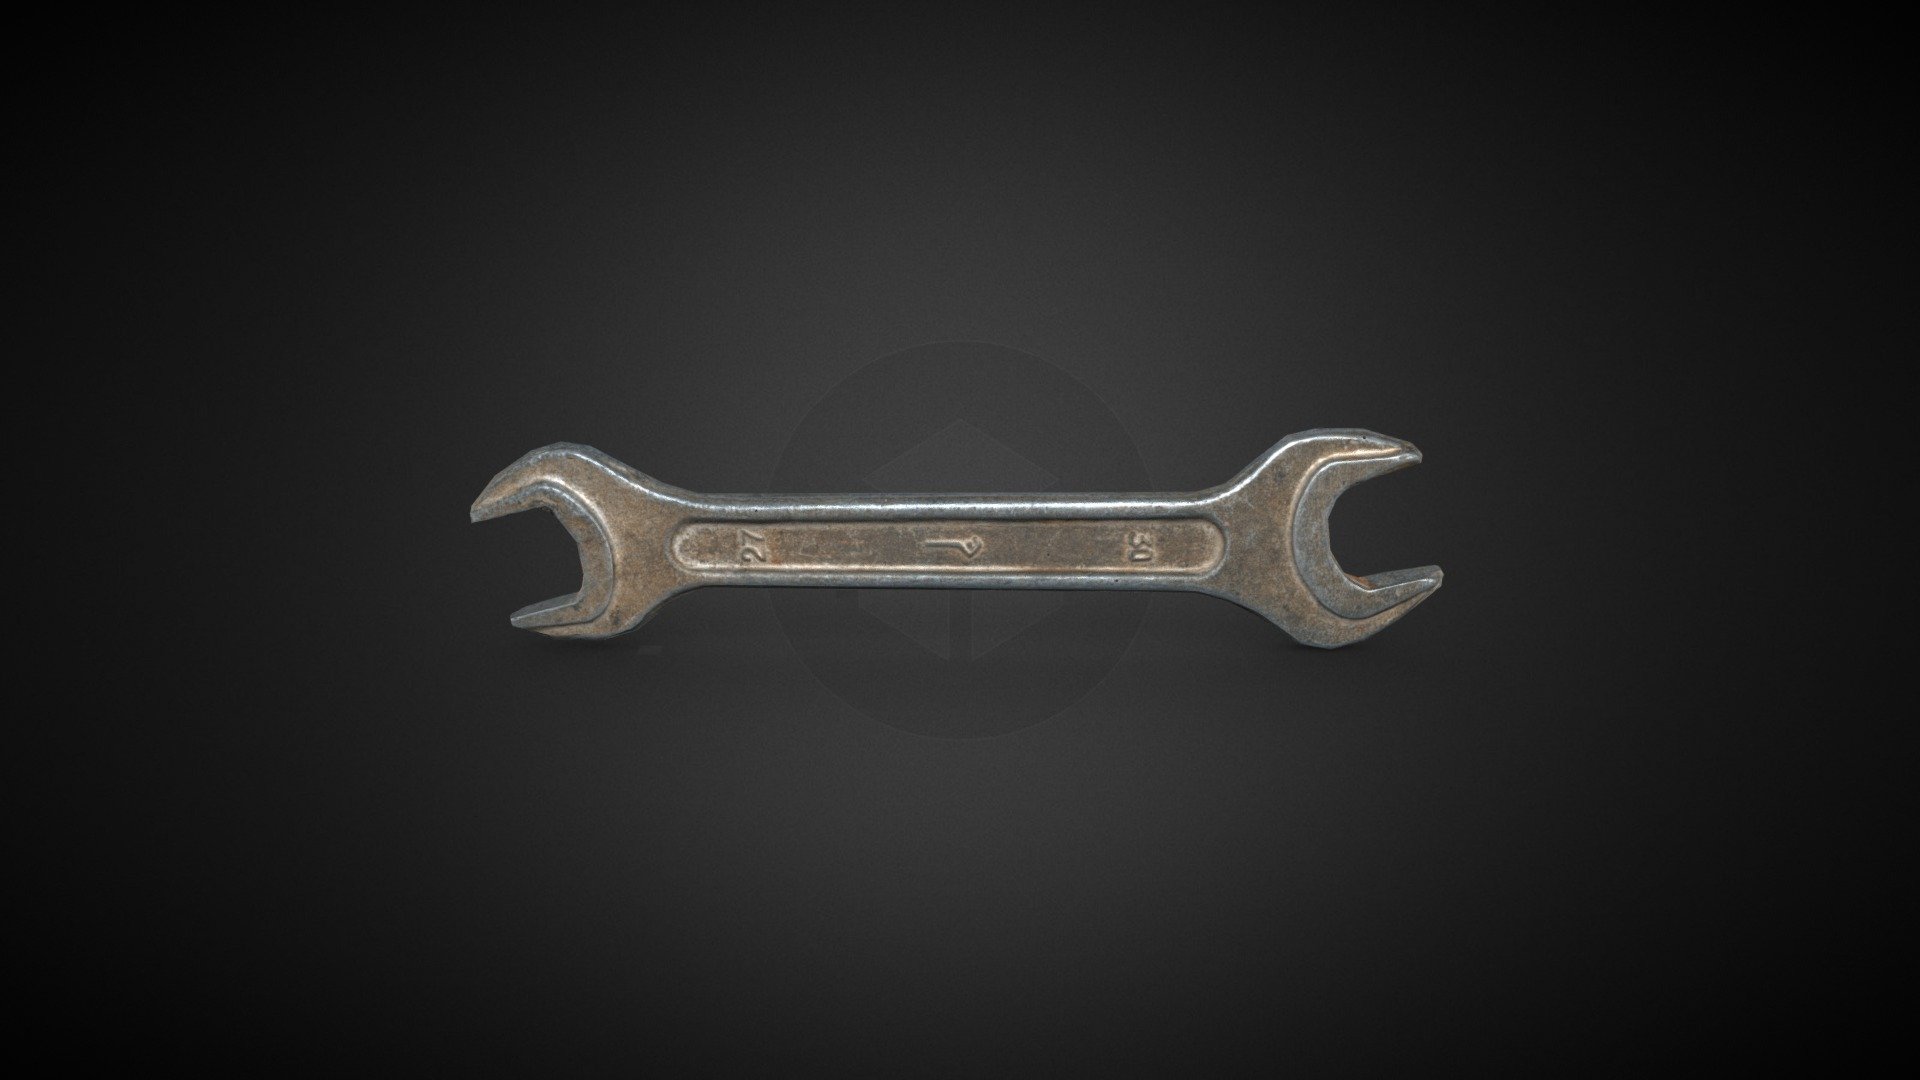 3D model of old wrench from Russia based on photogrammetry photoscan.

Low-poly and mid-poly model in .fbx, .obj and .blend formats.

Model retopologized from high-poly photoscan.



Each model contains 4 PBR textures in 4k resolution:



Albedo/Base color map



Roughness map



Normal map



Metallness map






Low-poly model:



Verticles: 412



Triangles: 820






Mid-poly model:



Verticles: 5375



Triangles: 8480



https://youtu.be/hj2LTYUsmLc - Wrench 3D model game-ready photoscan 03 - 3D model by ba_wan 3d model